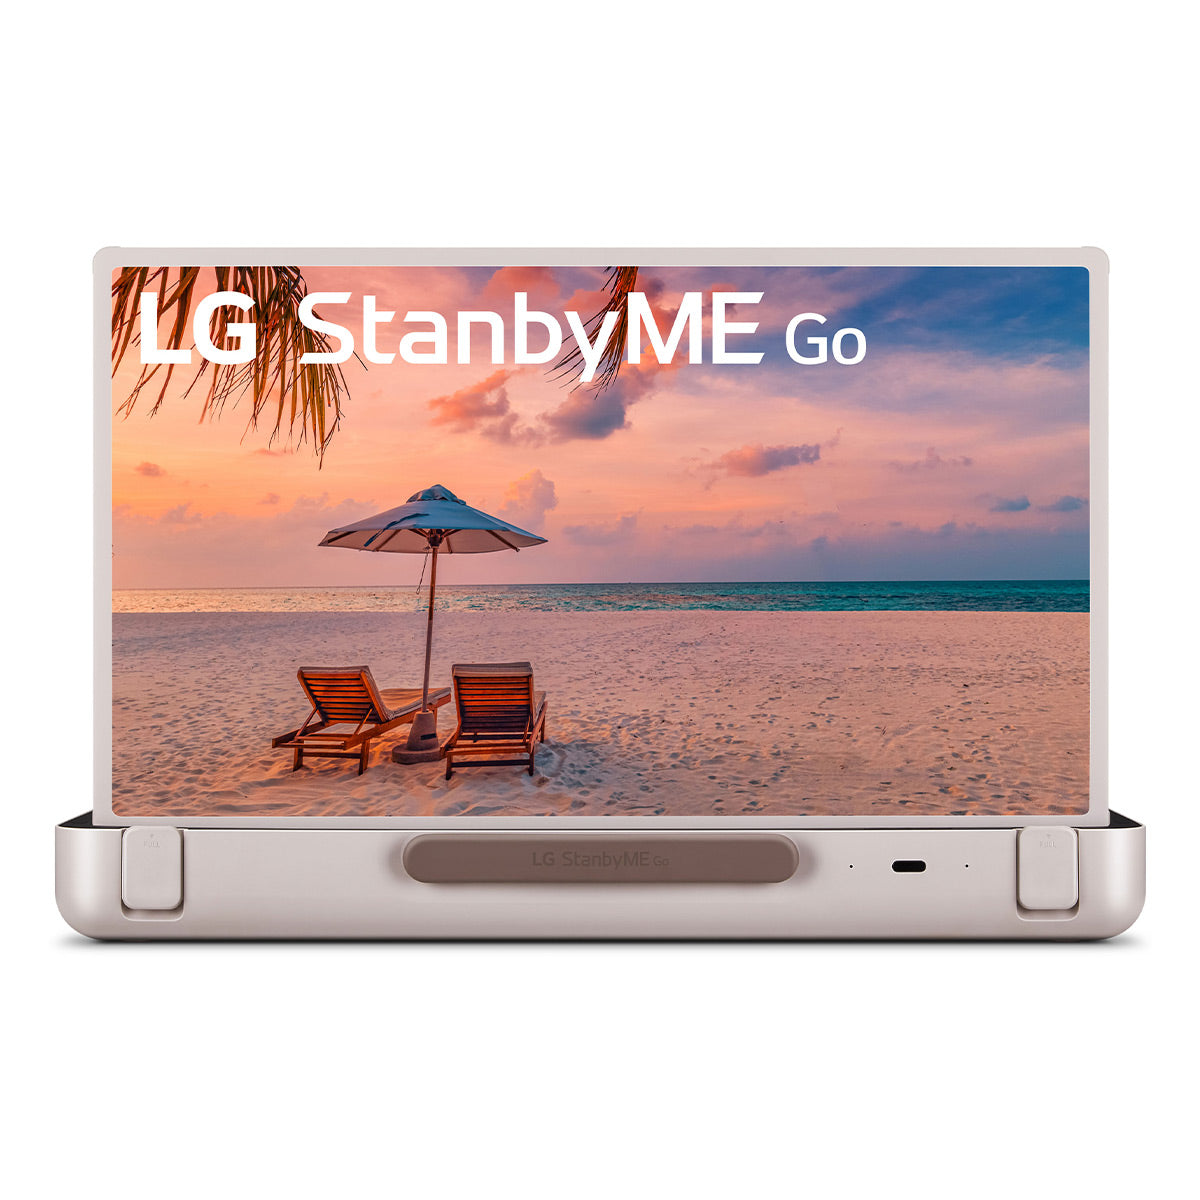 LG StandbyME Go 27" Full HD HDR Smart LED Portable Briefcase TV